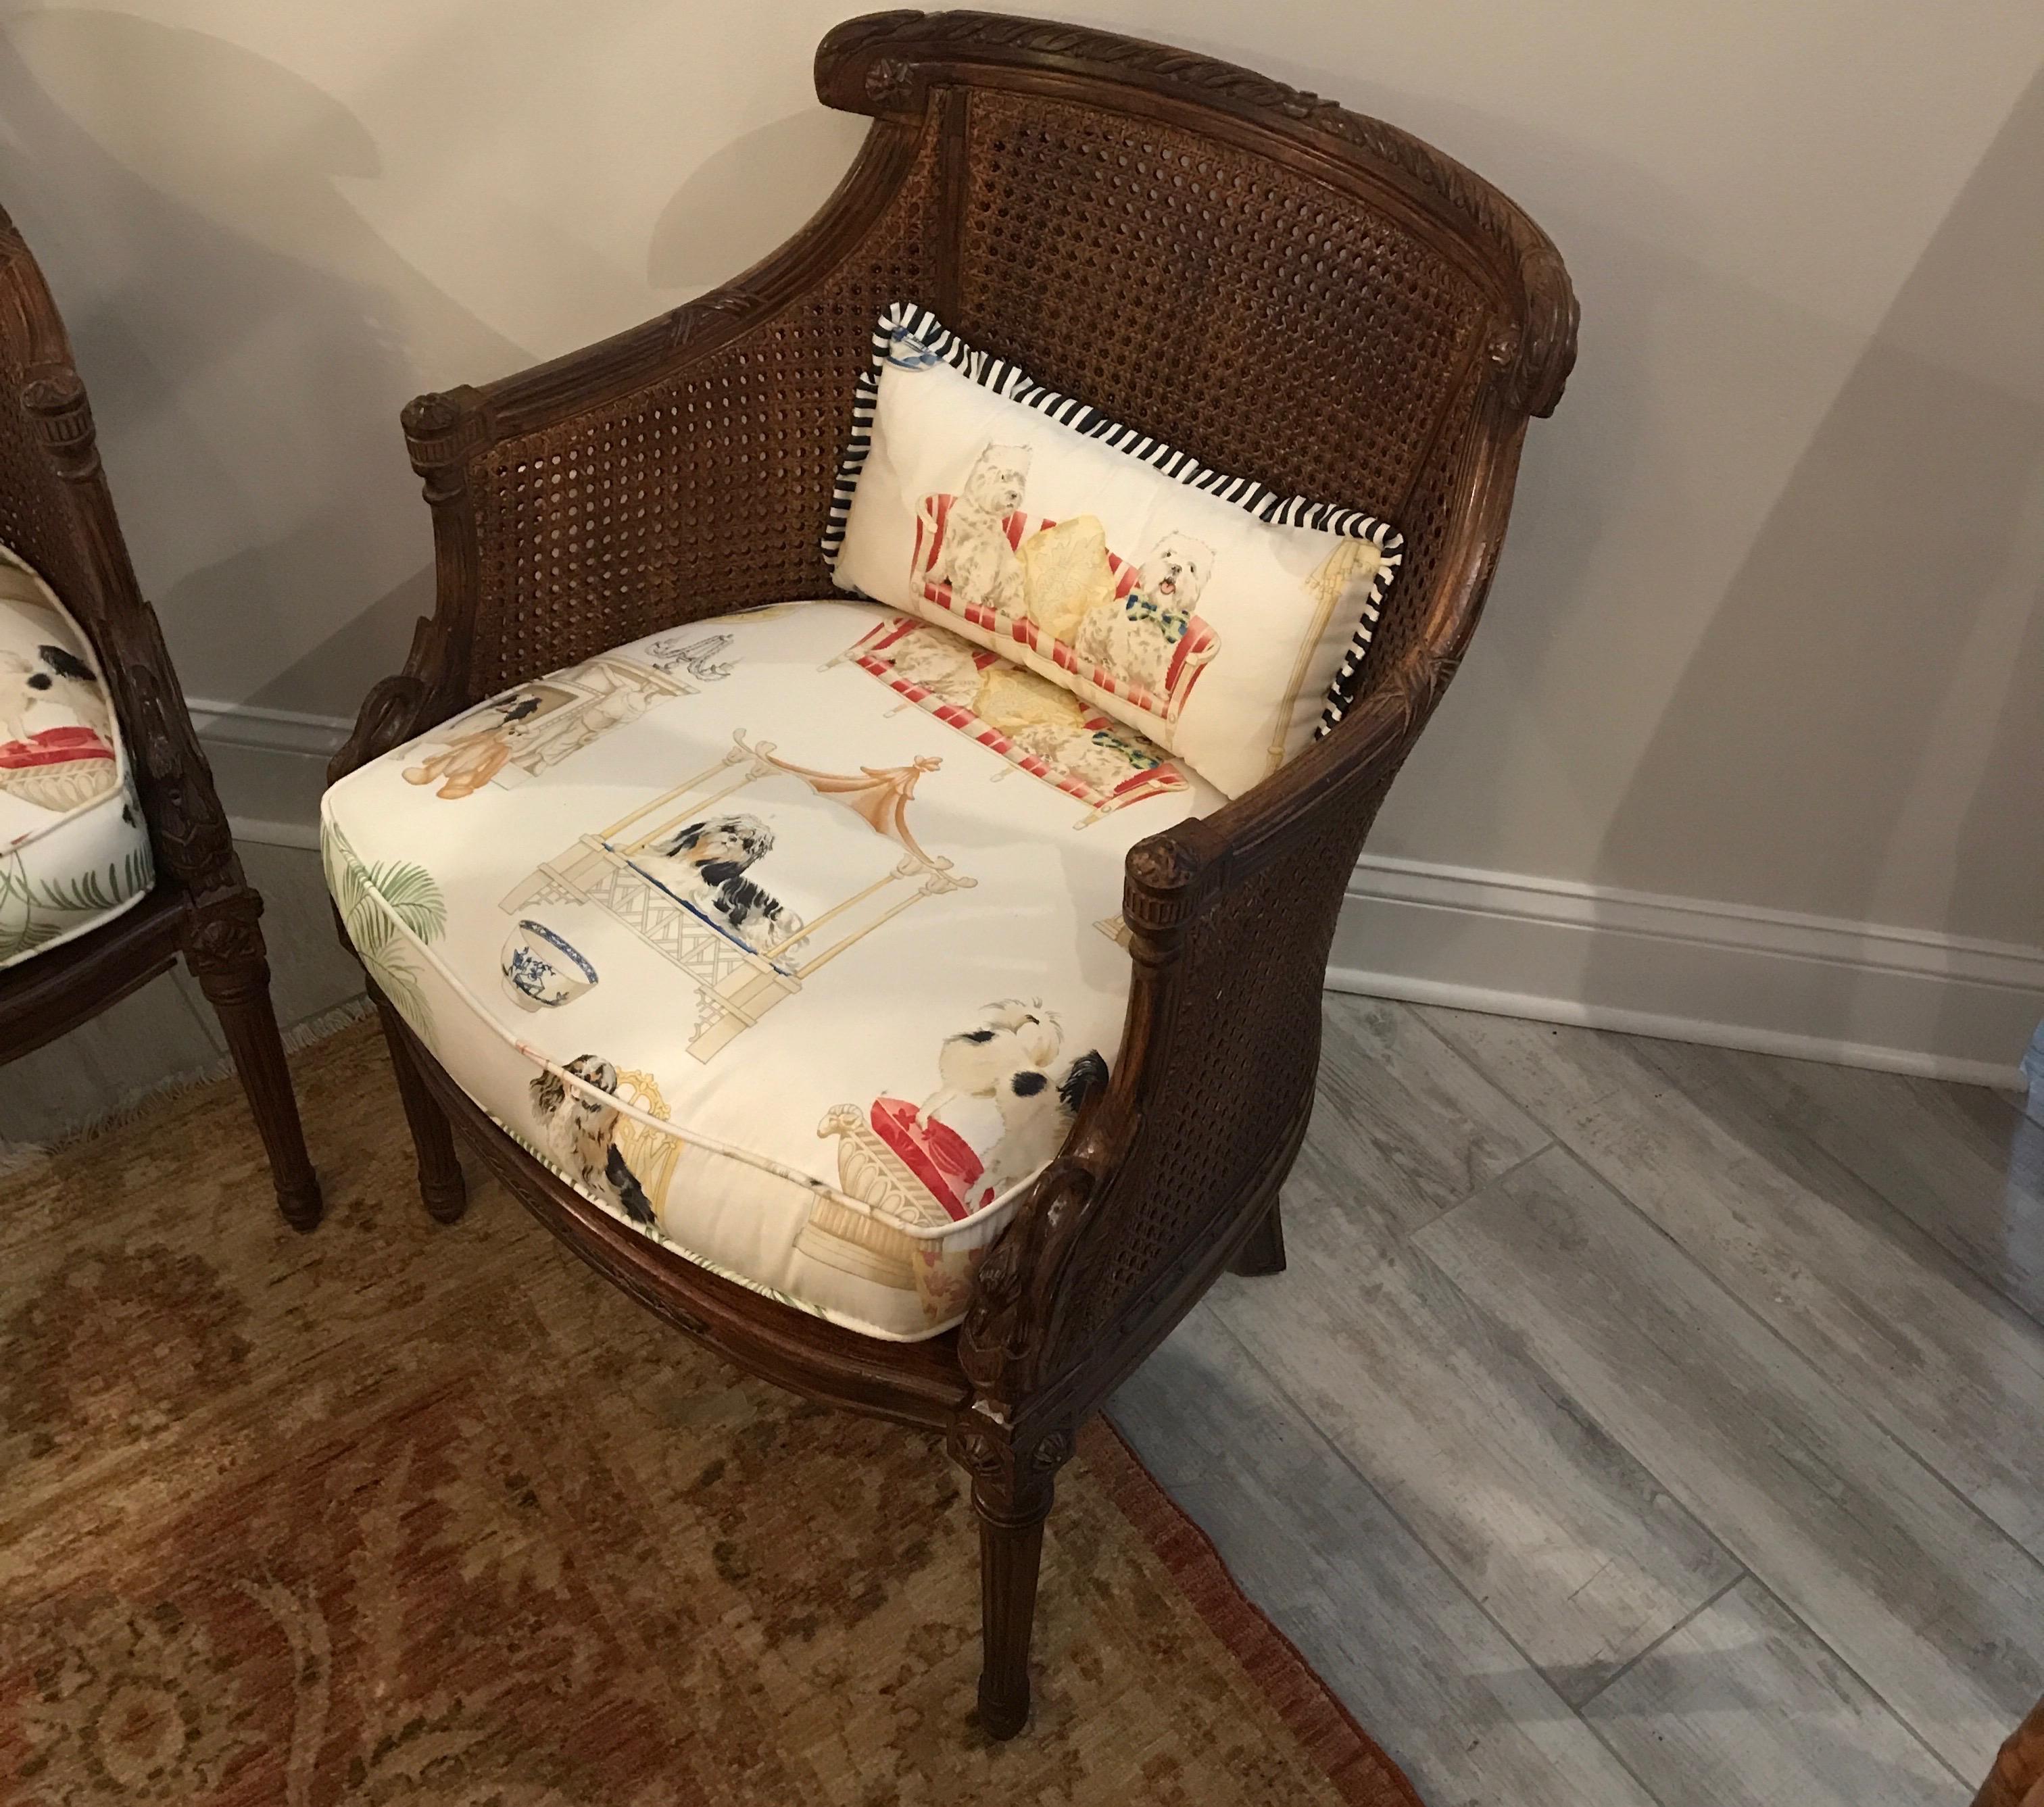 Lovely pair of Directoire style caned armchairs with swan heads. Cushion done in a whimsical fabric with different breeds of dogs in canopy beds, etc.